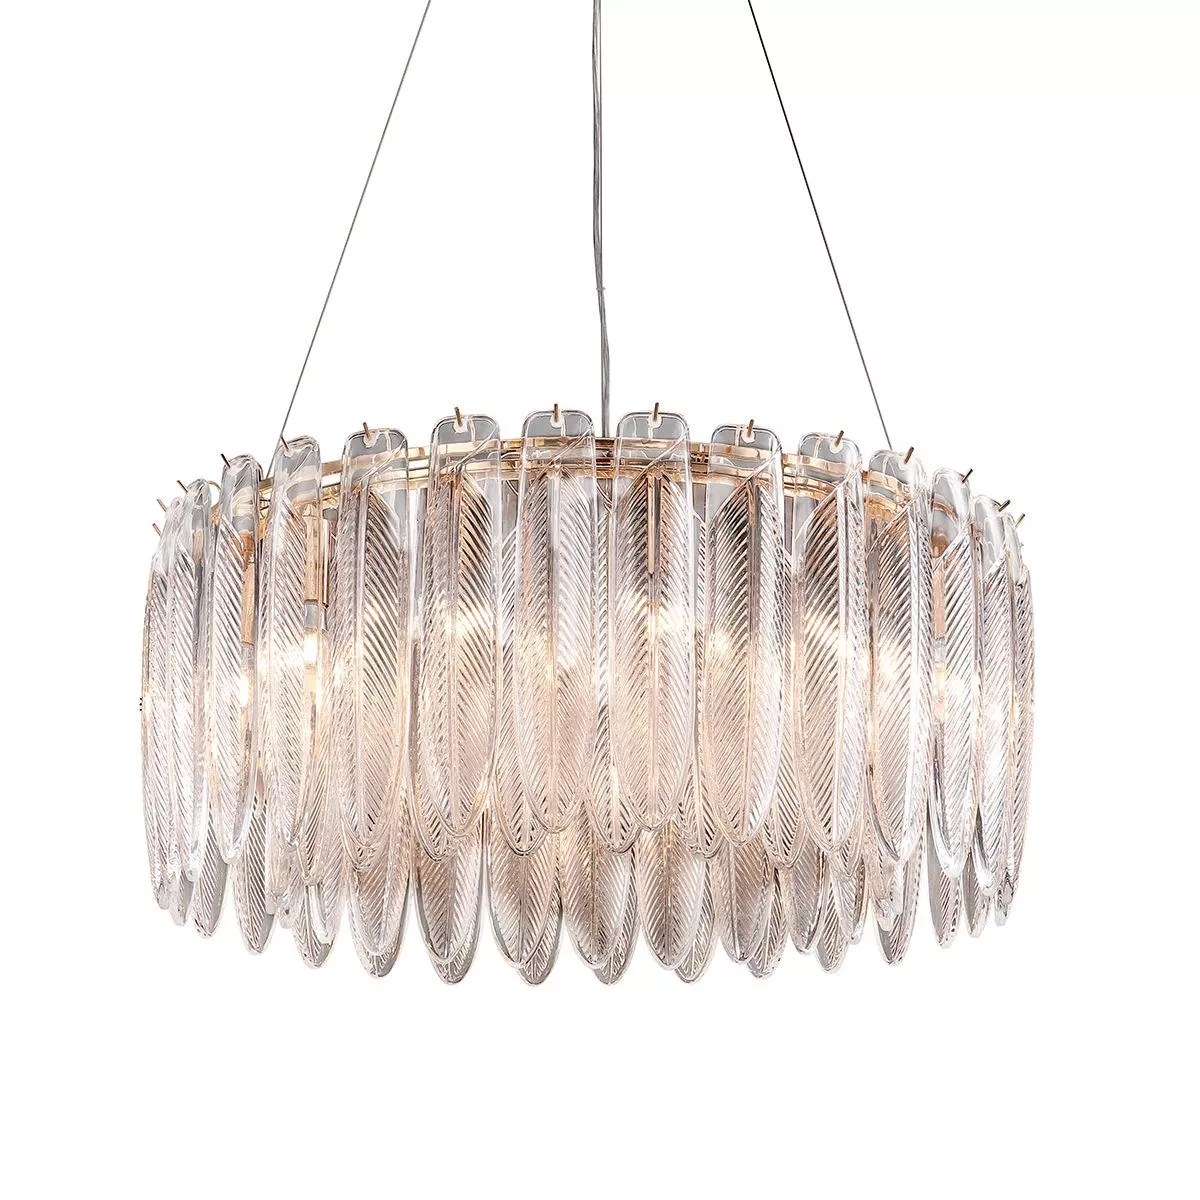 Люстра Delight Collection MD22027002 MD22027002-D65 light rose gold